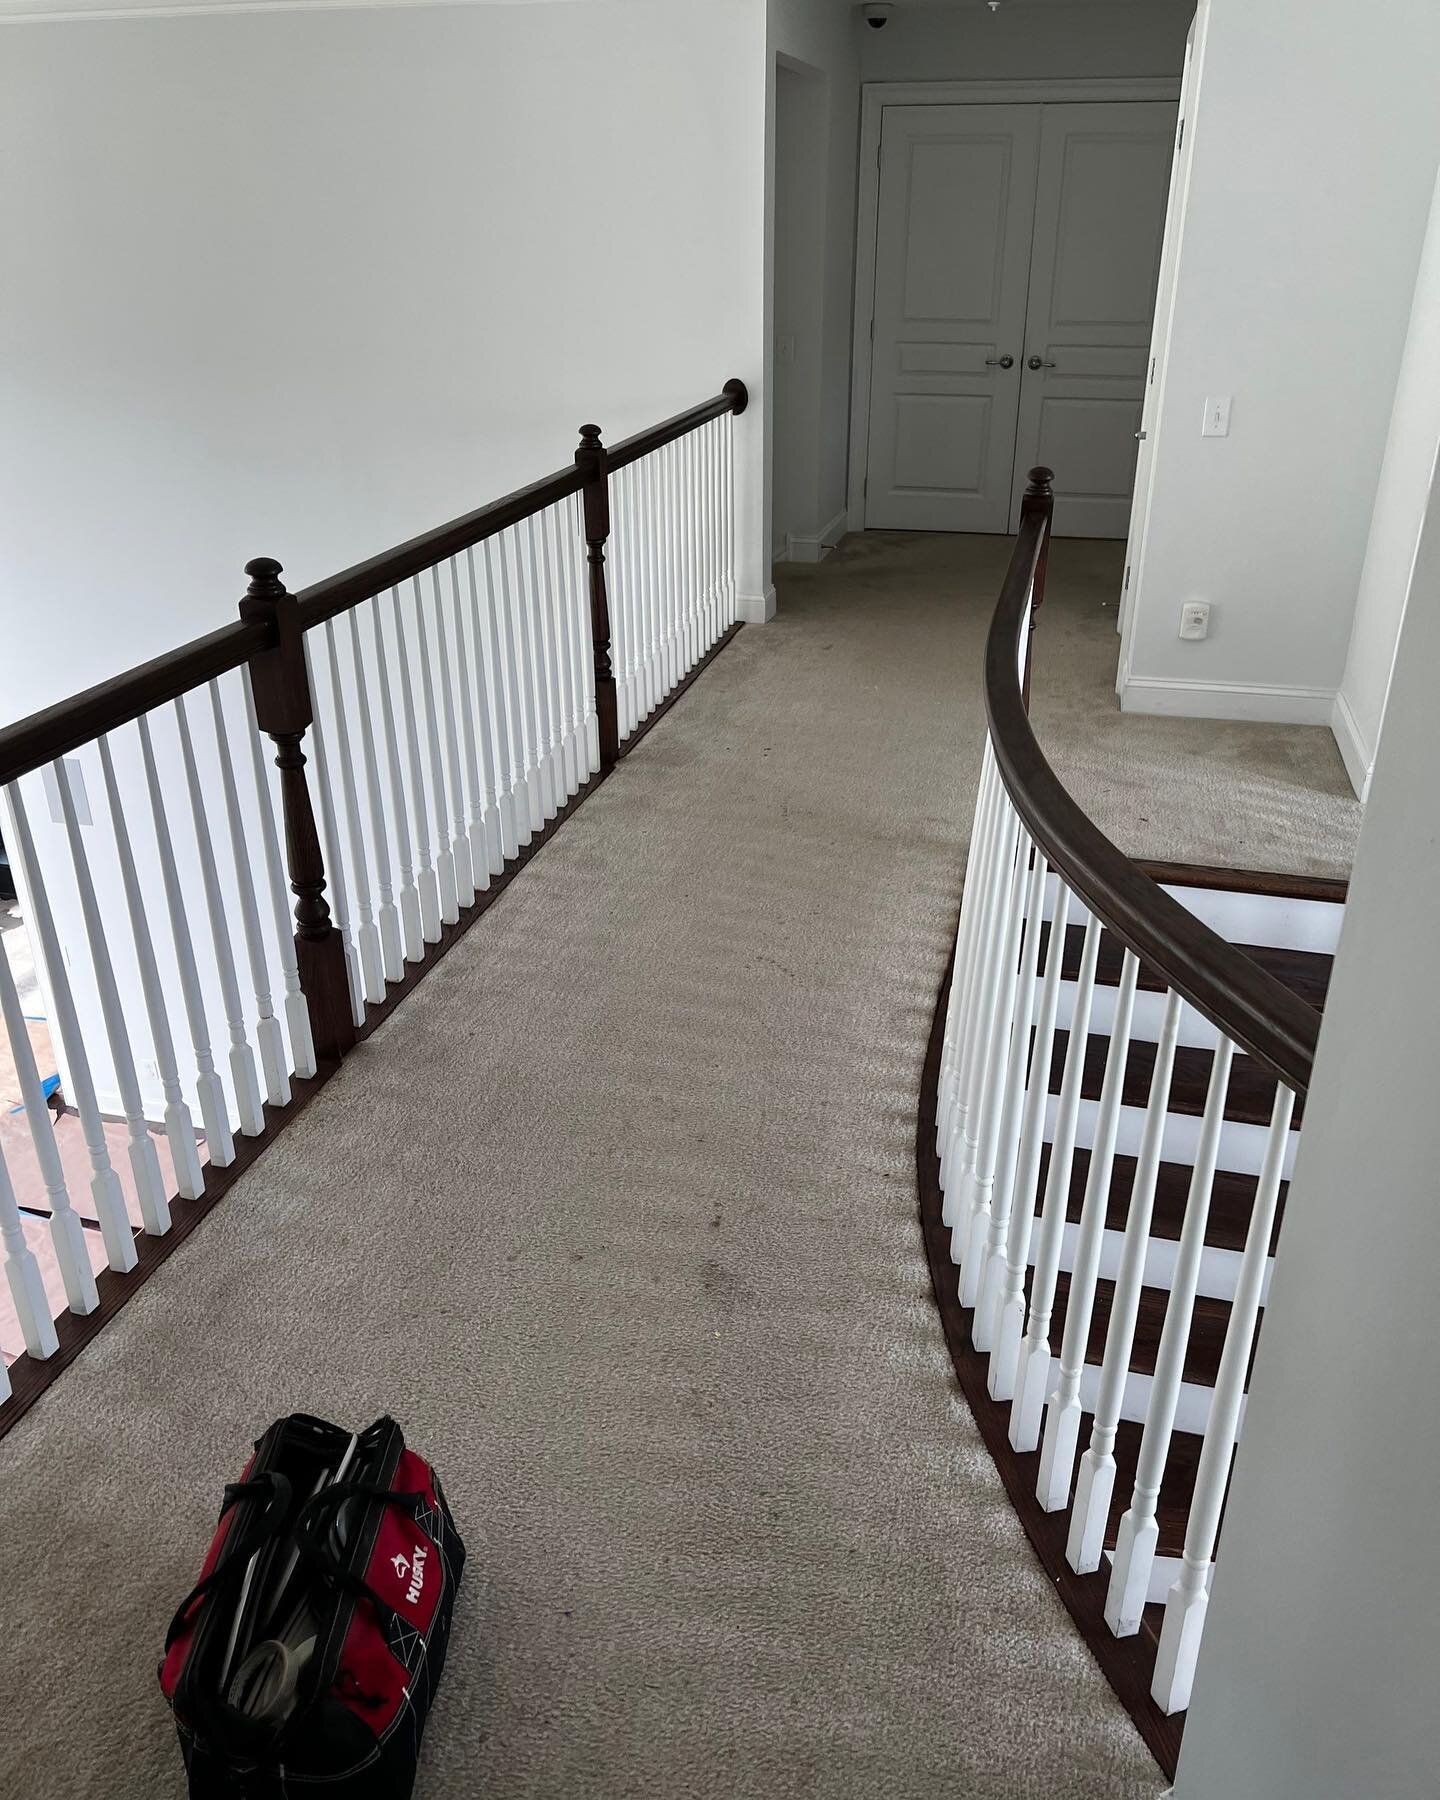 Swipe to see this carpet transform from light ➡️ dark 

Looking for carpet experts you can trust? With 40+ years of experience, we know what works, what won&rsquo;t, and how to prevent common pitfalls. Click the link in our bio to learn more about us